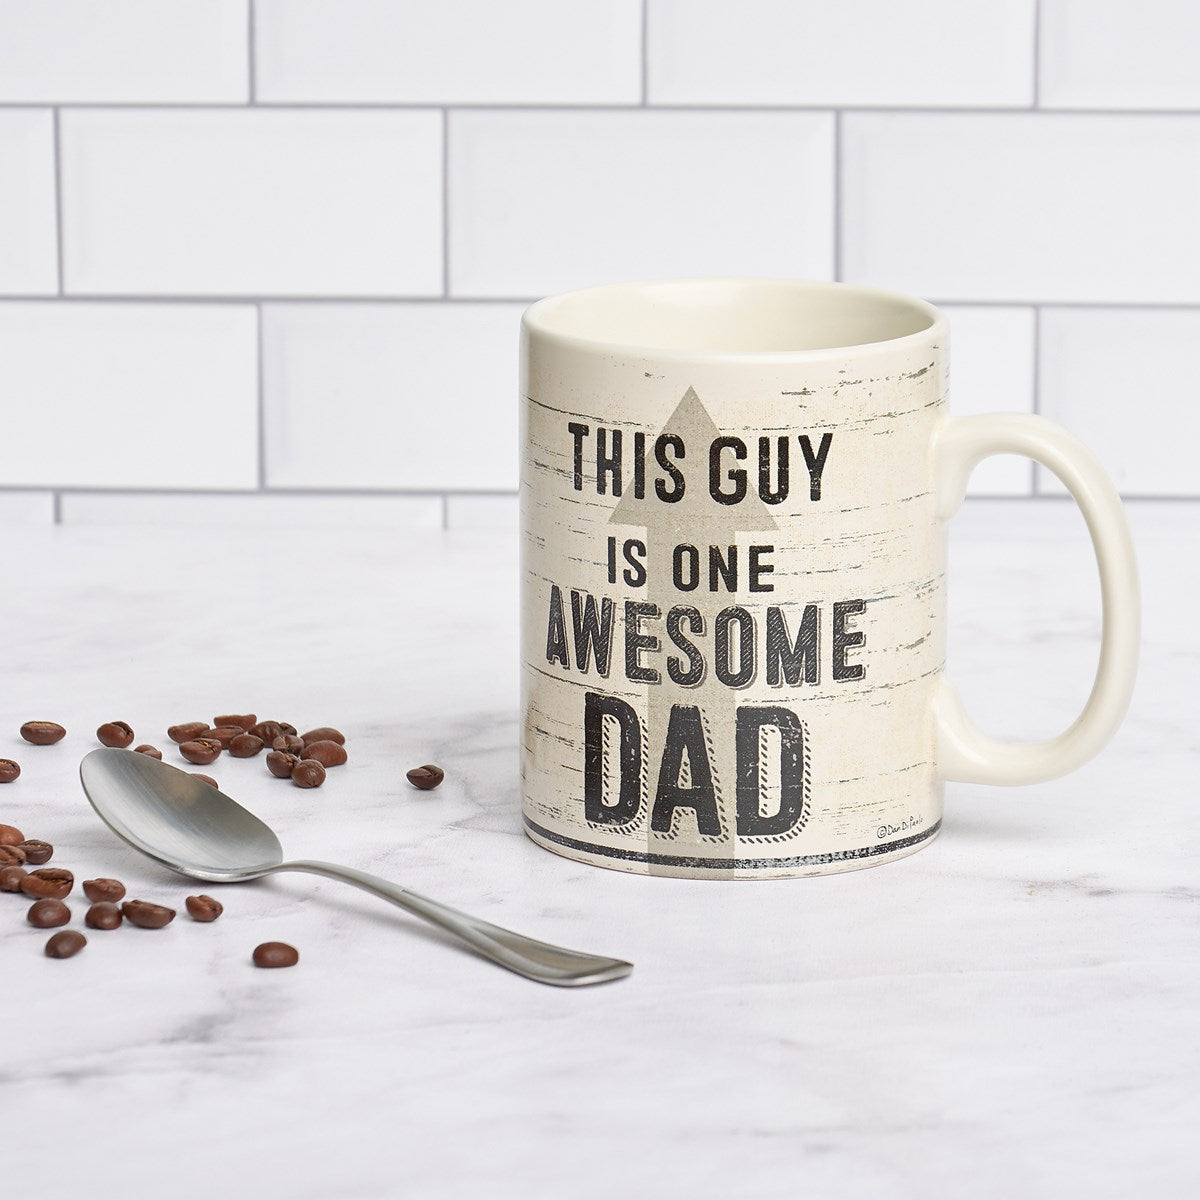 This Guy Is One Awesome Dad Mug 20 oz